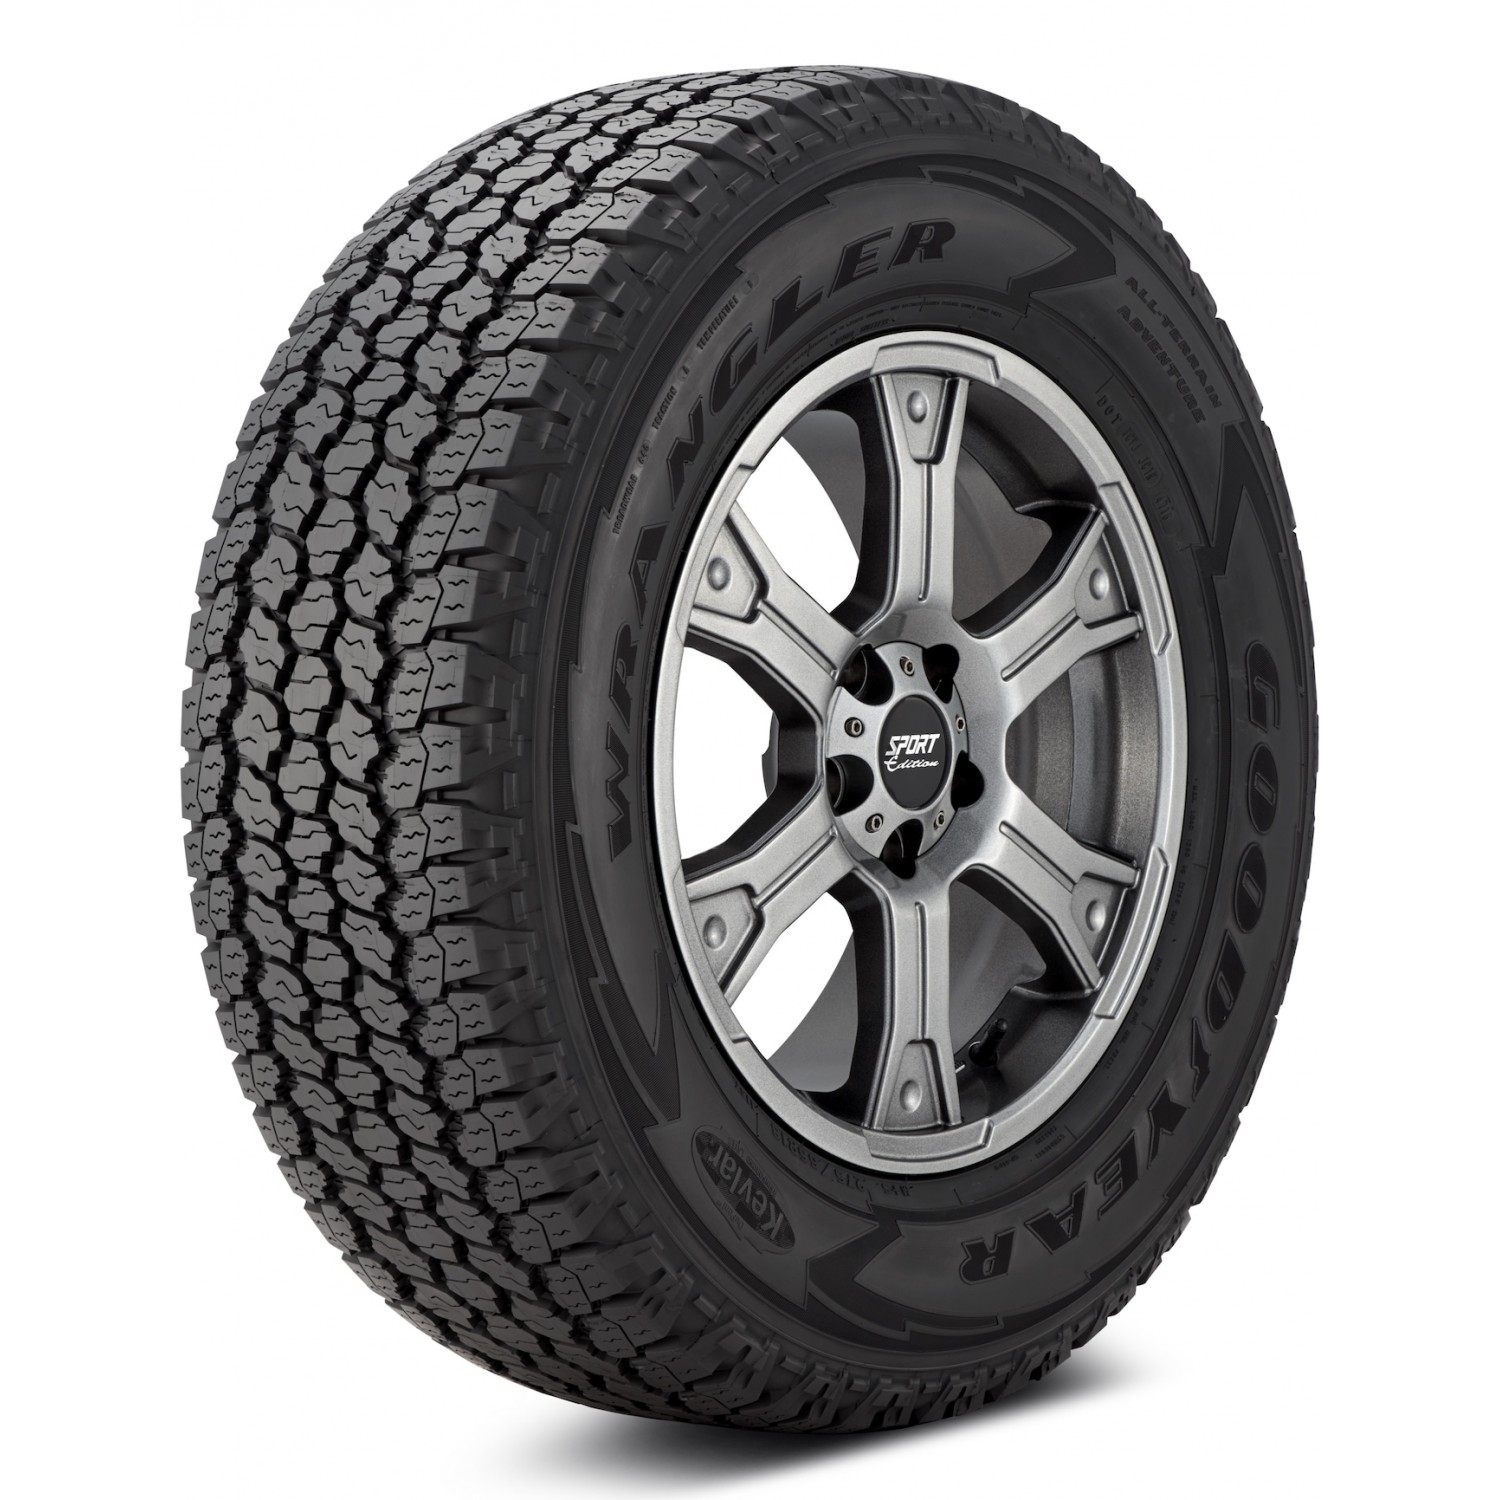 Goodyear Wrangler AT Adventure With Kevlar Black Sidewall Tire (265/70R17  115T) vzn121223